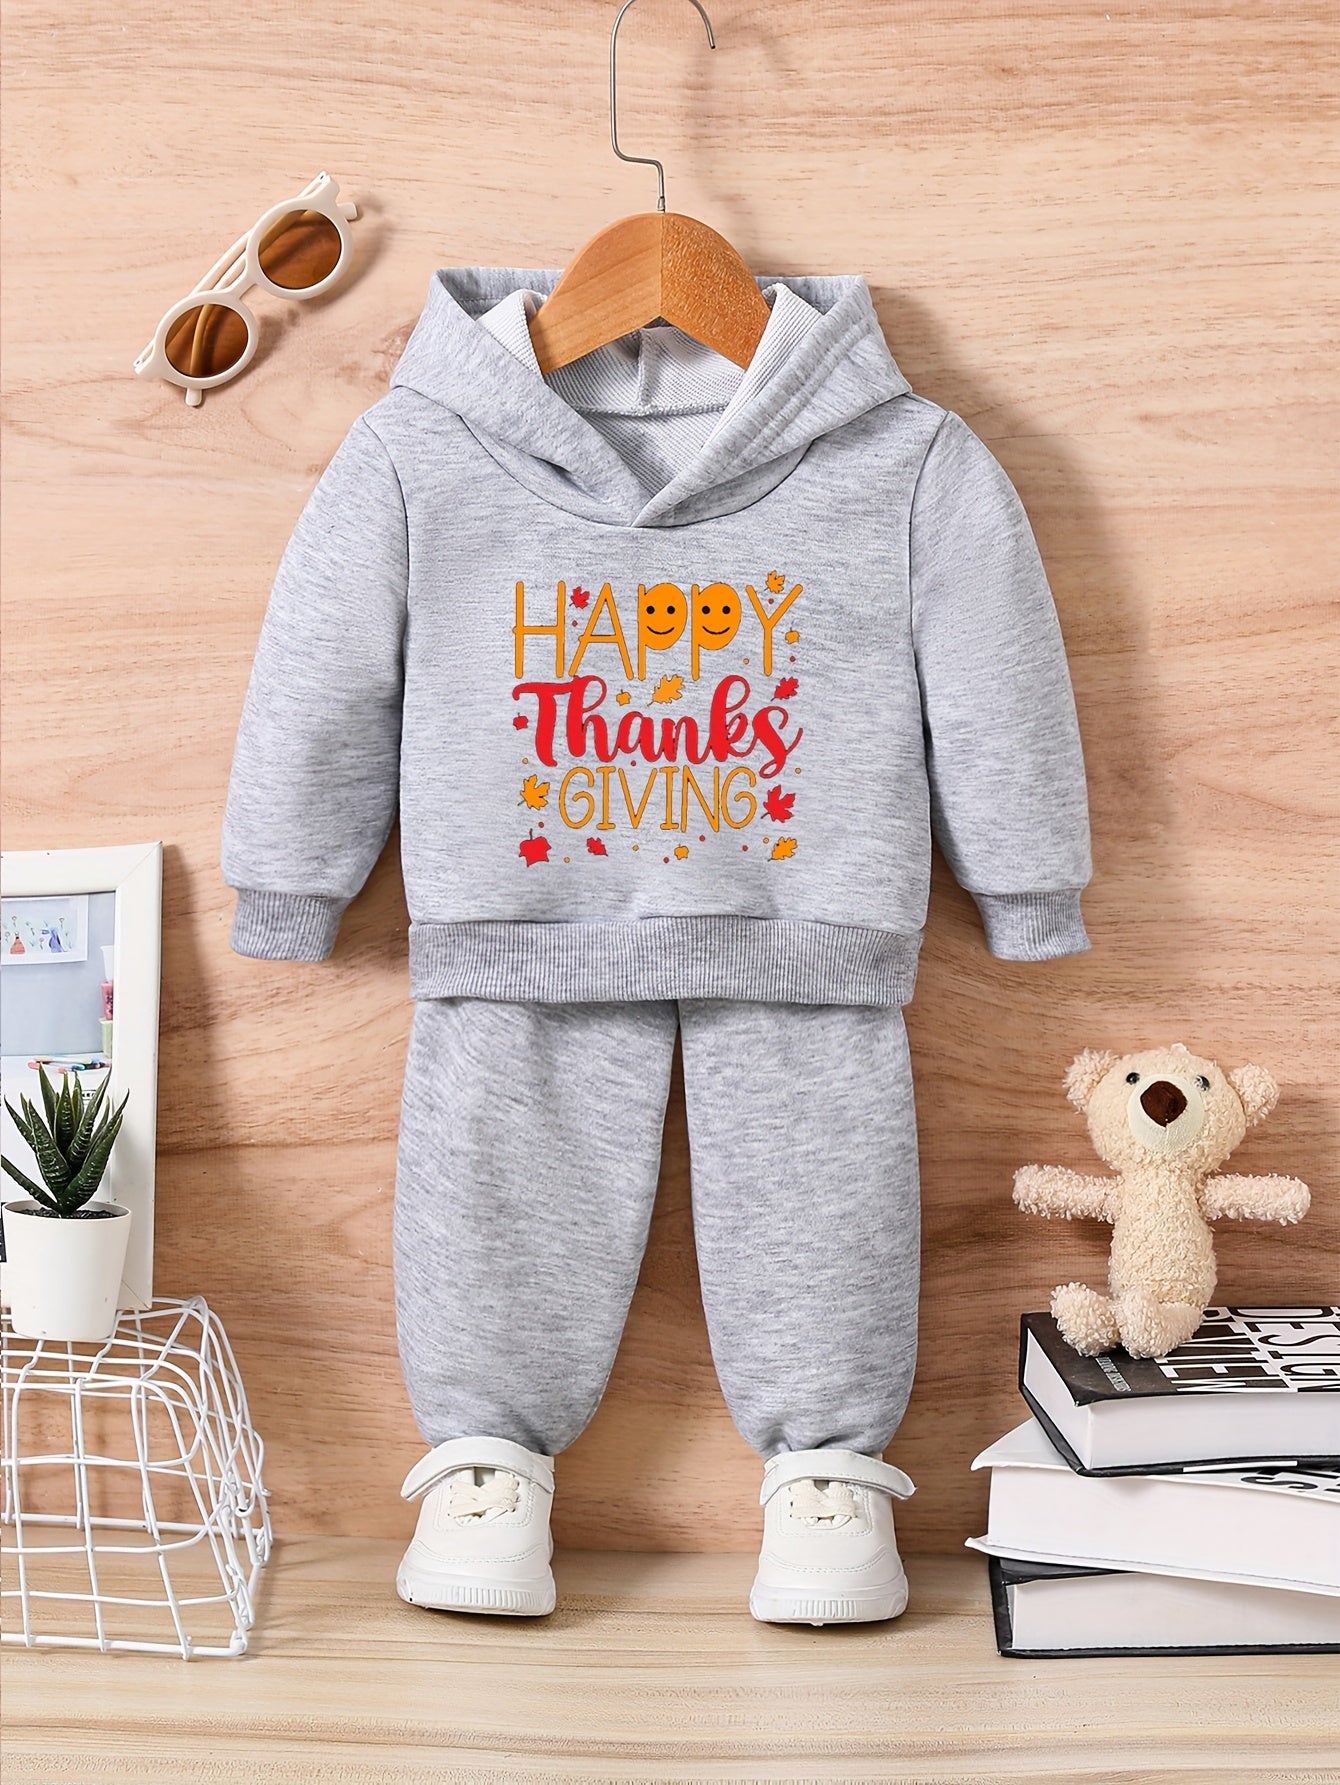 HAPPY THANKSGIVING (thanksgiving themed) Toddler Christian Casual Outfit claimedbygoddesigns